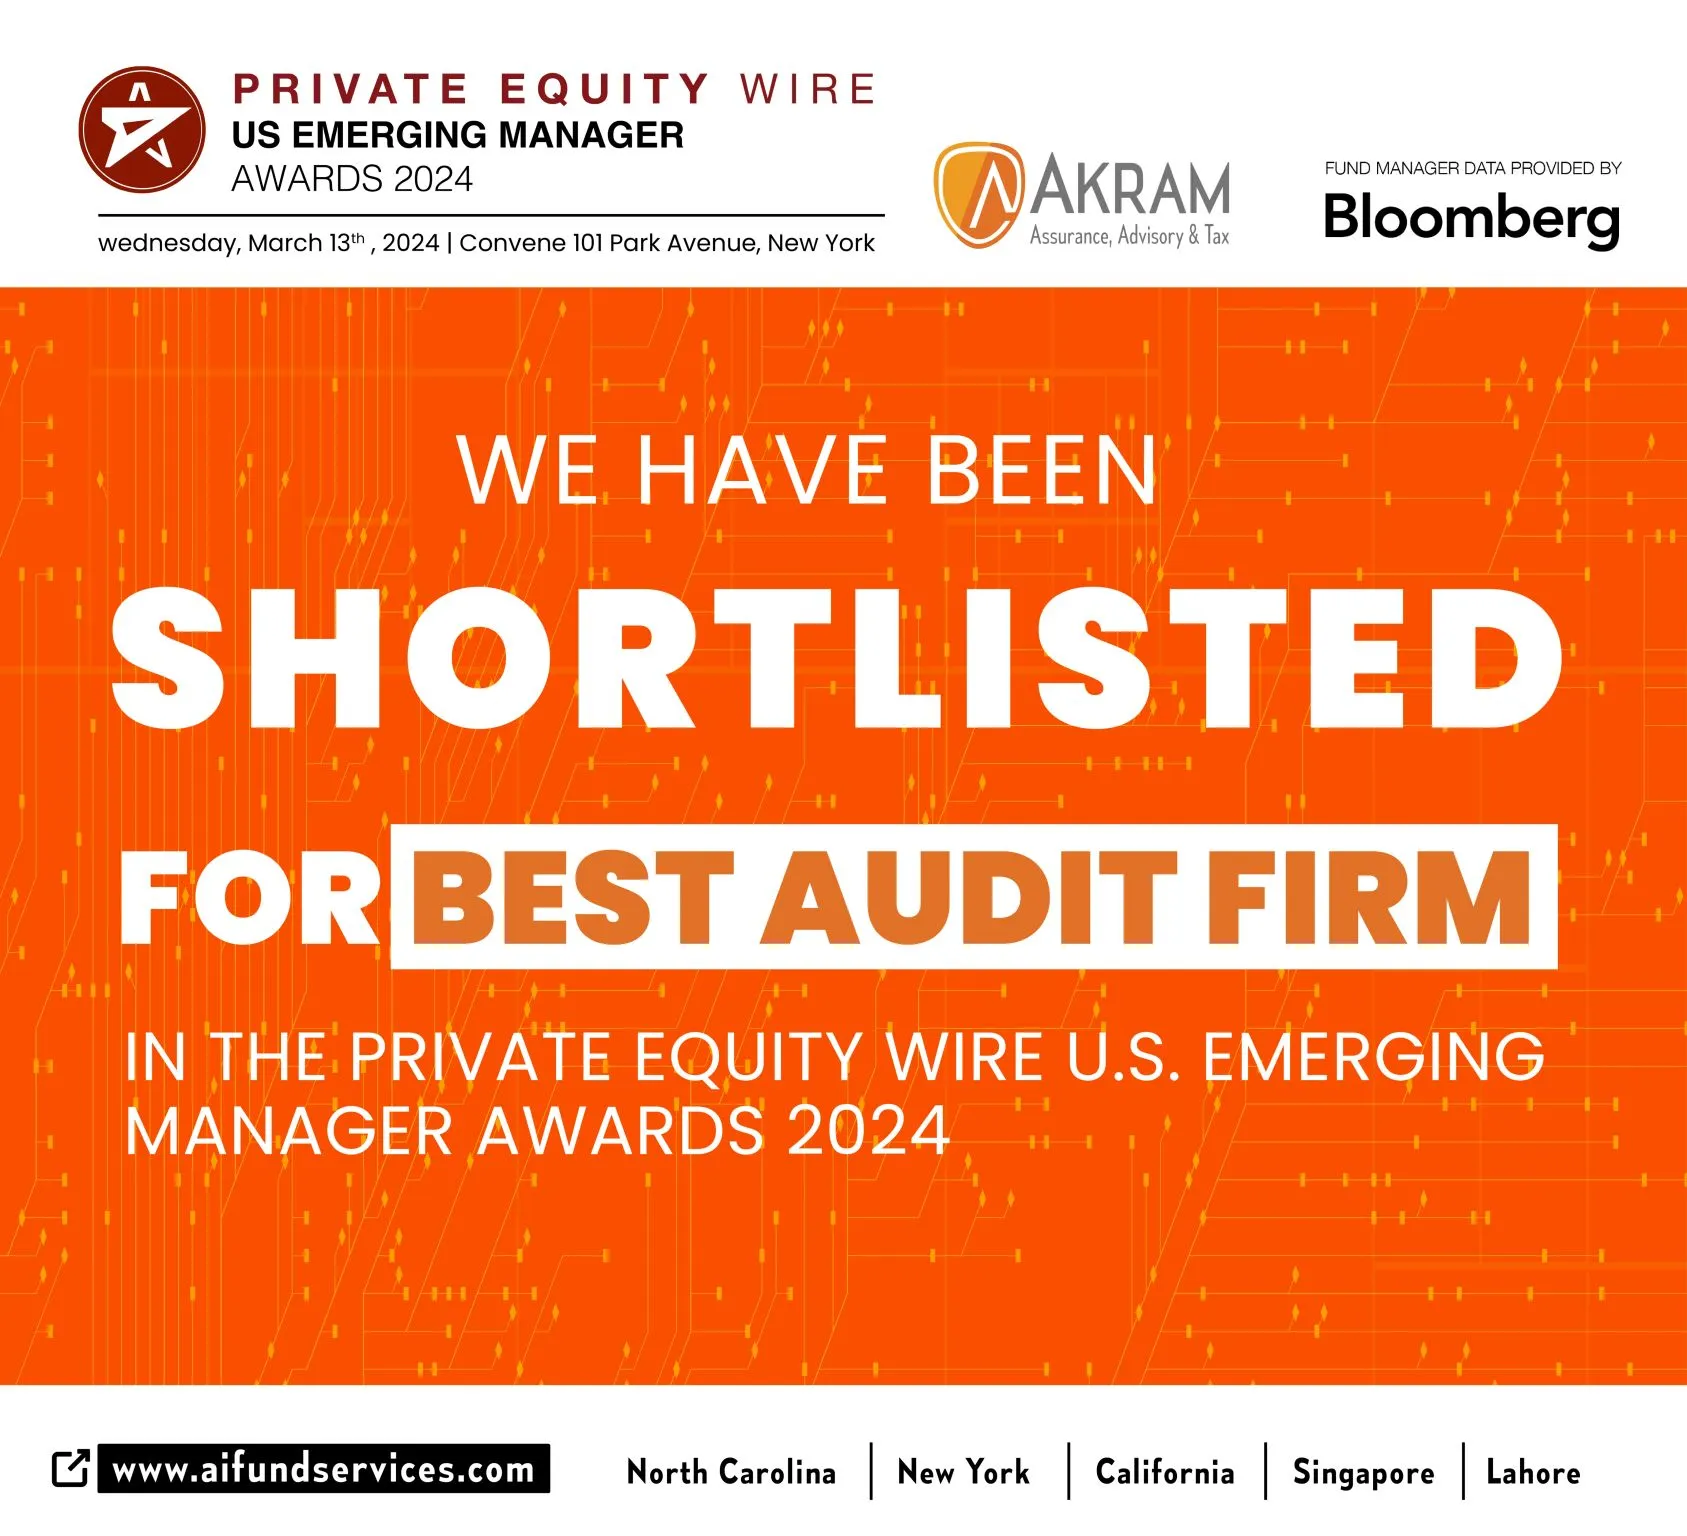 Akram is shortlisted- Hedgeweek and Private Equity Wire Americas Awards 2023